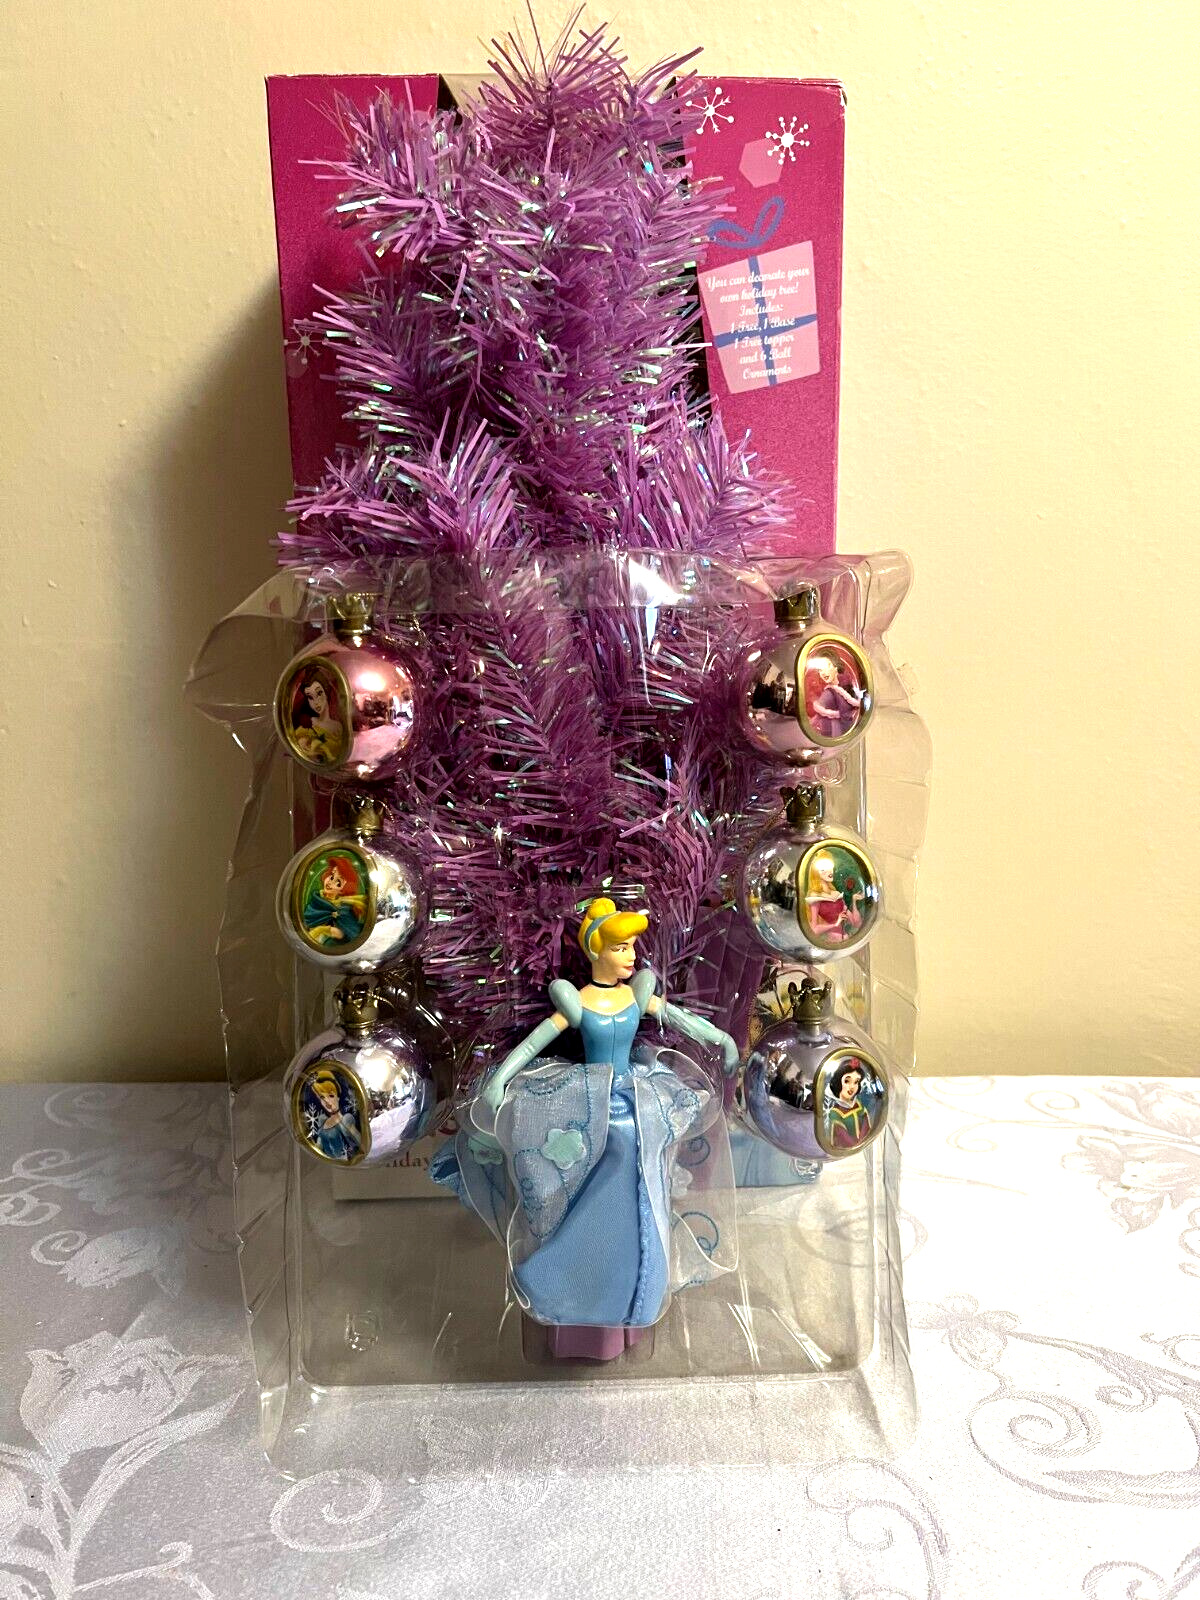 Disney Princess Christmas Holiday Tree Set Collectible 2005 Gemmy Ornaments Top